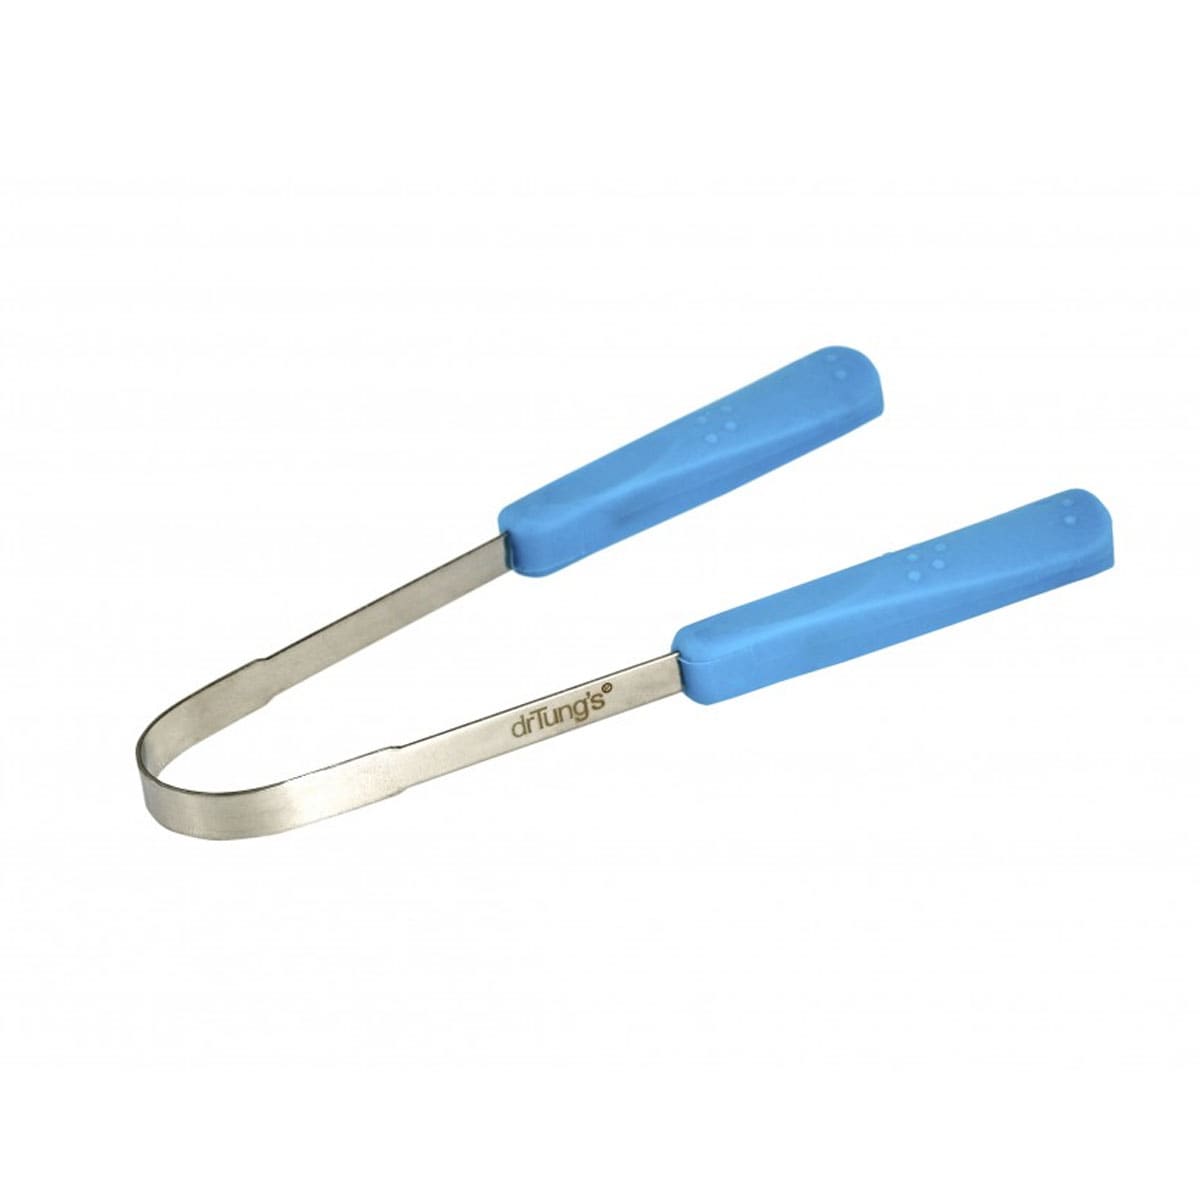 Dr Tungs Tongue Cleaner Stainless Steel